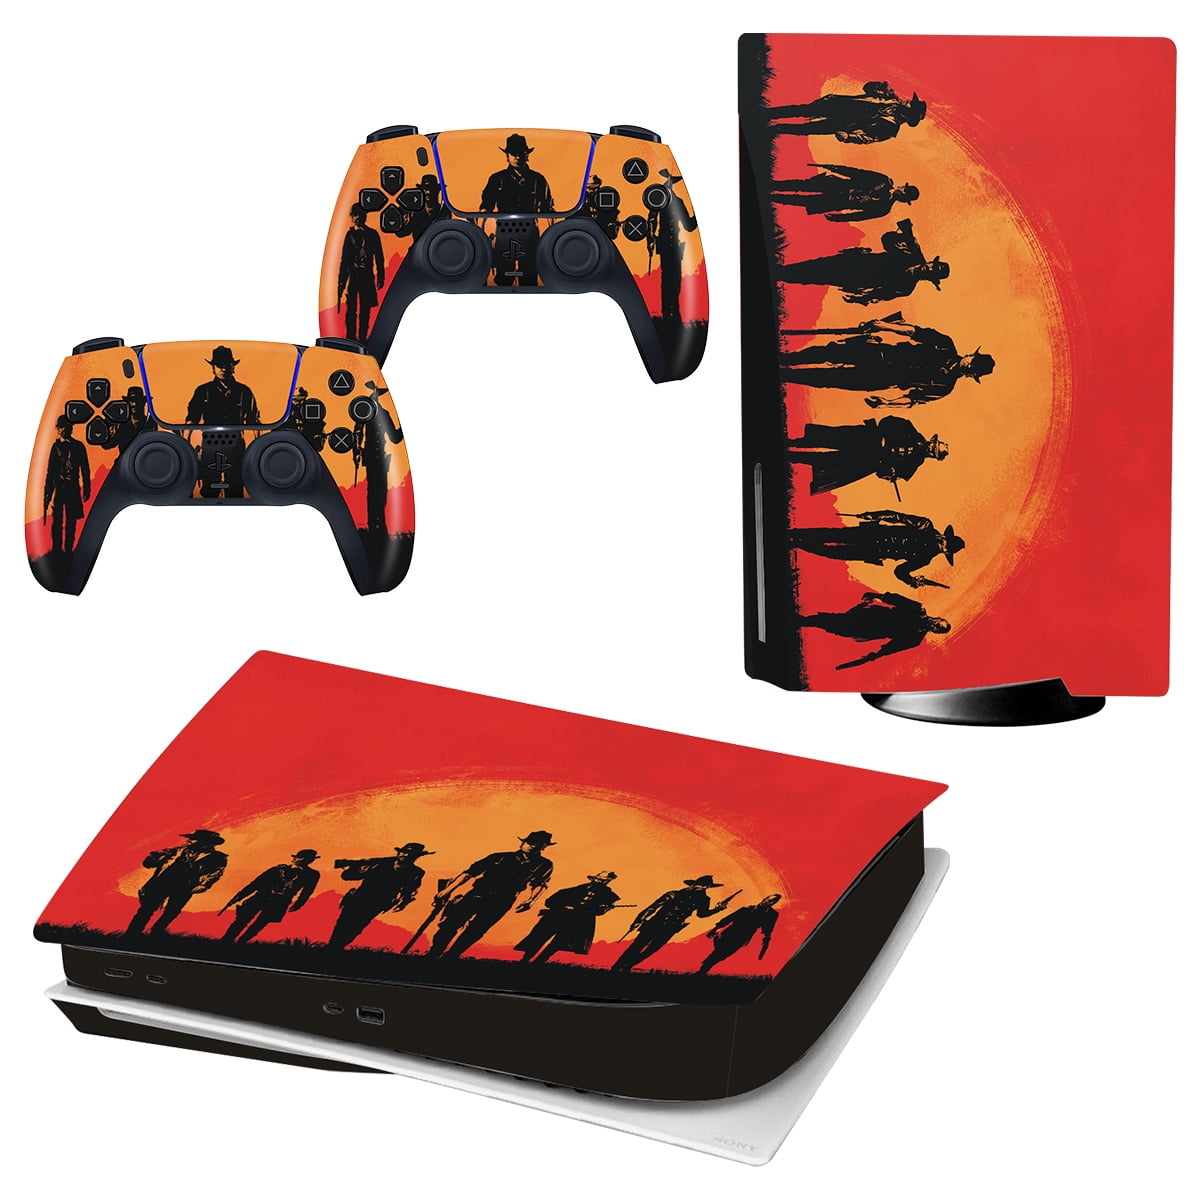 hook Pursuit Opinion GameXcel Vinyl Decal Protective Cover Wrap Sticker vinilo Calcomanía for  Sony PS5 Disc Console and Wireless Controller(Red Dead Redemption 2) -  Walmart.com